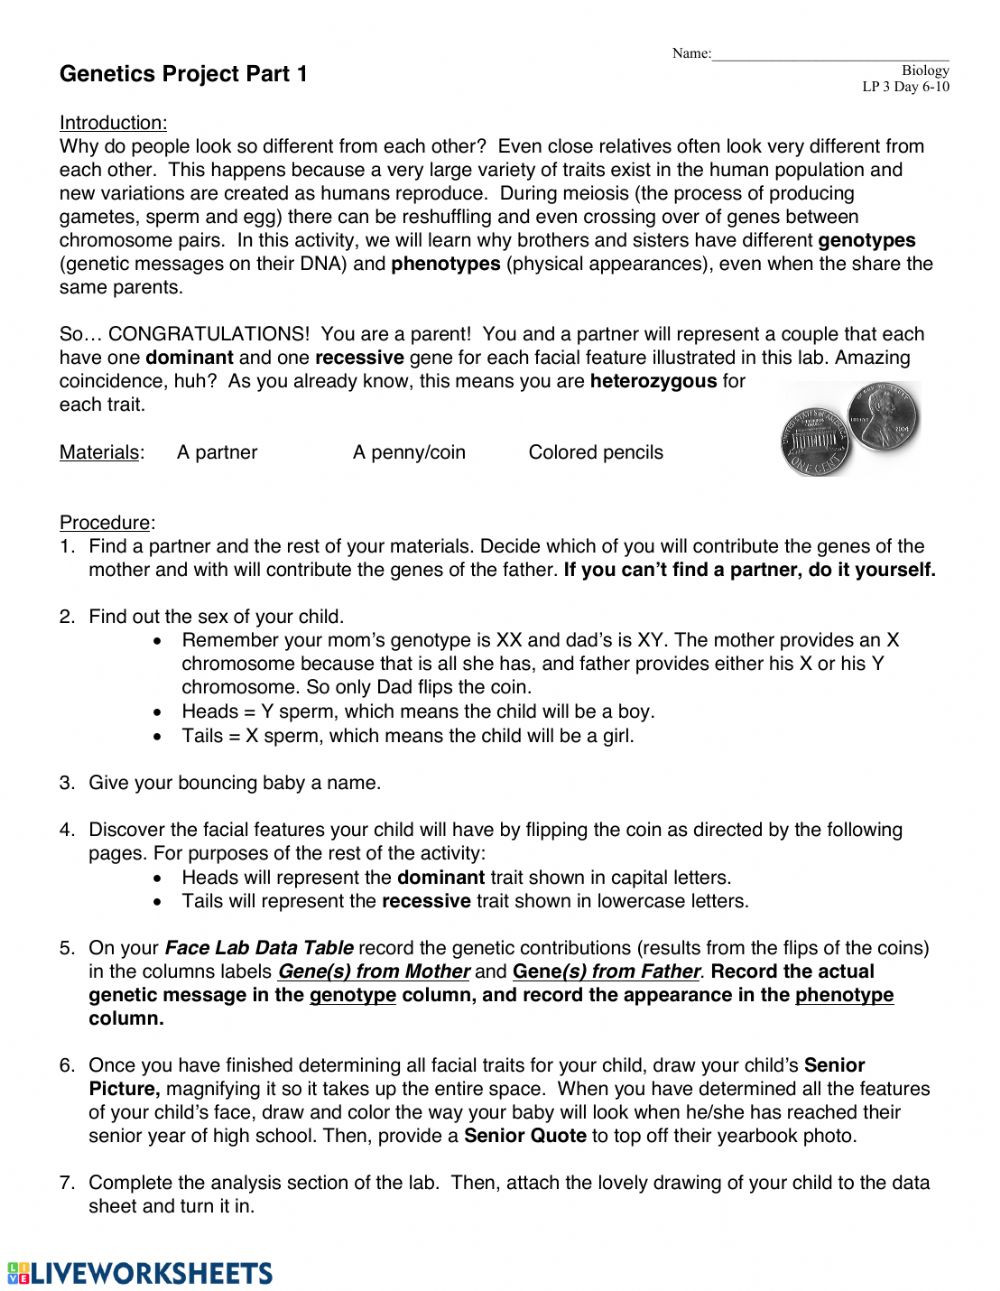 Genotypes and Phenotypes Worksheet Answers Biology Lp 3 D 6 10 Interactive Worksheet